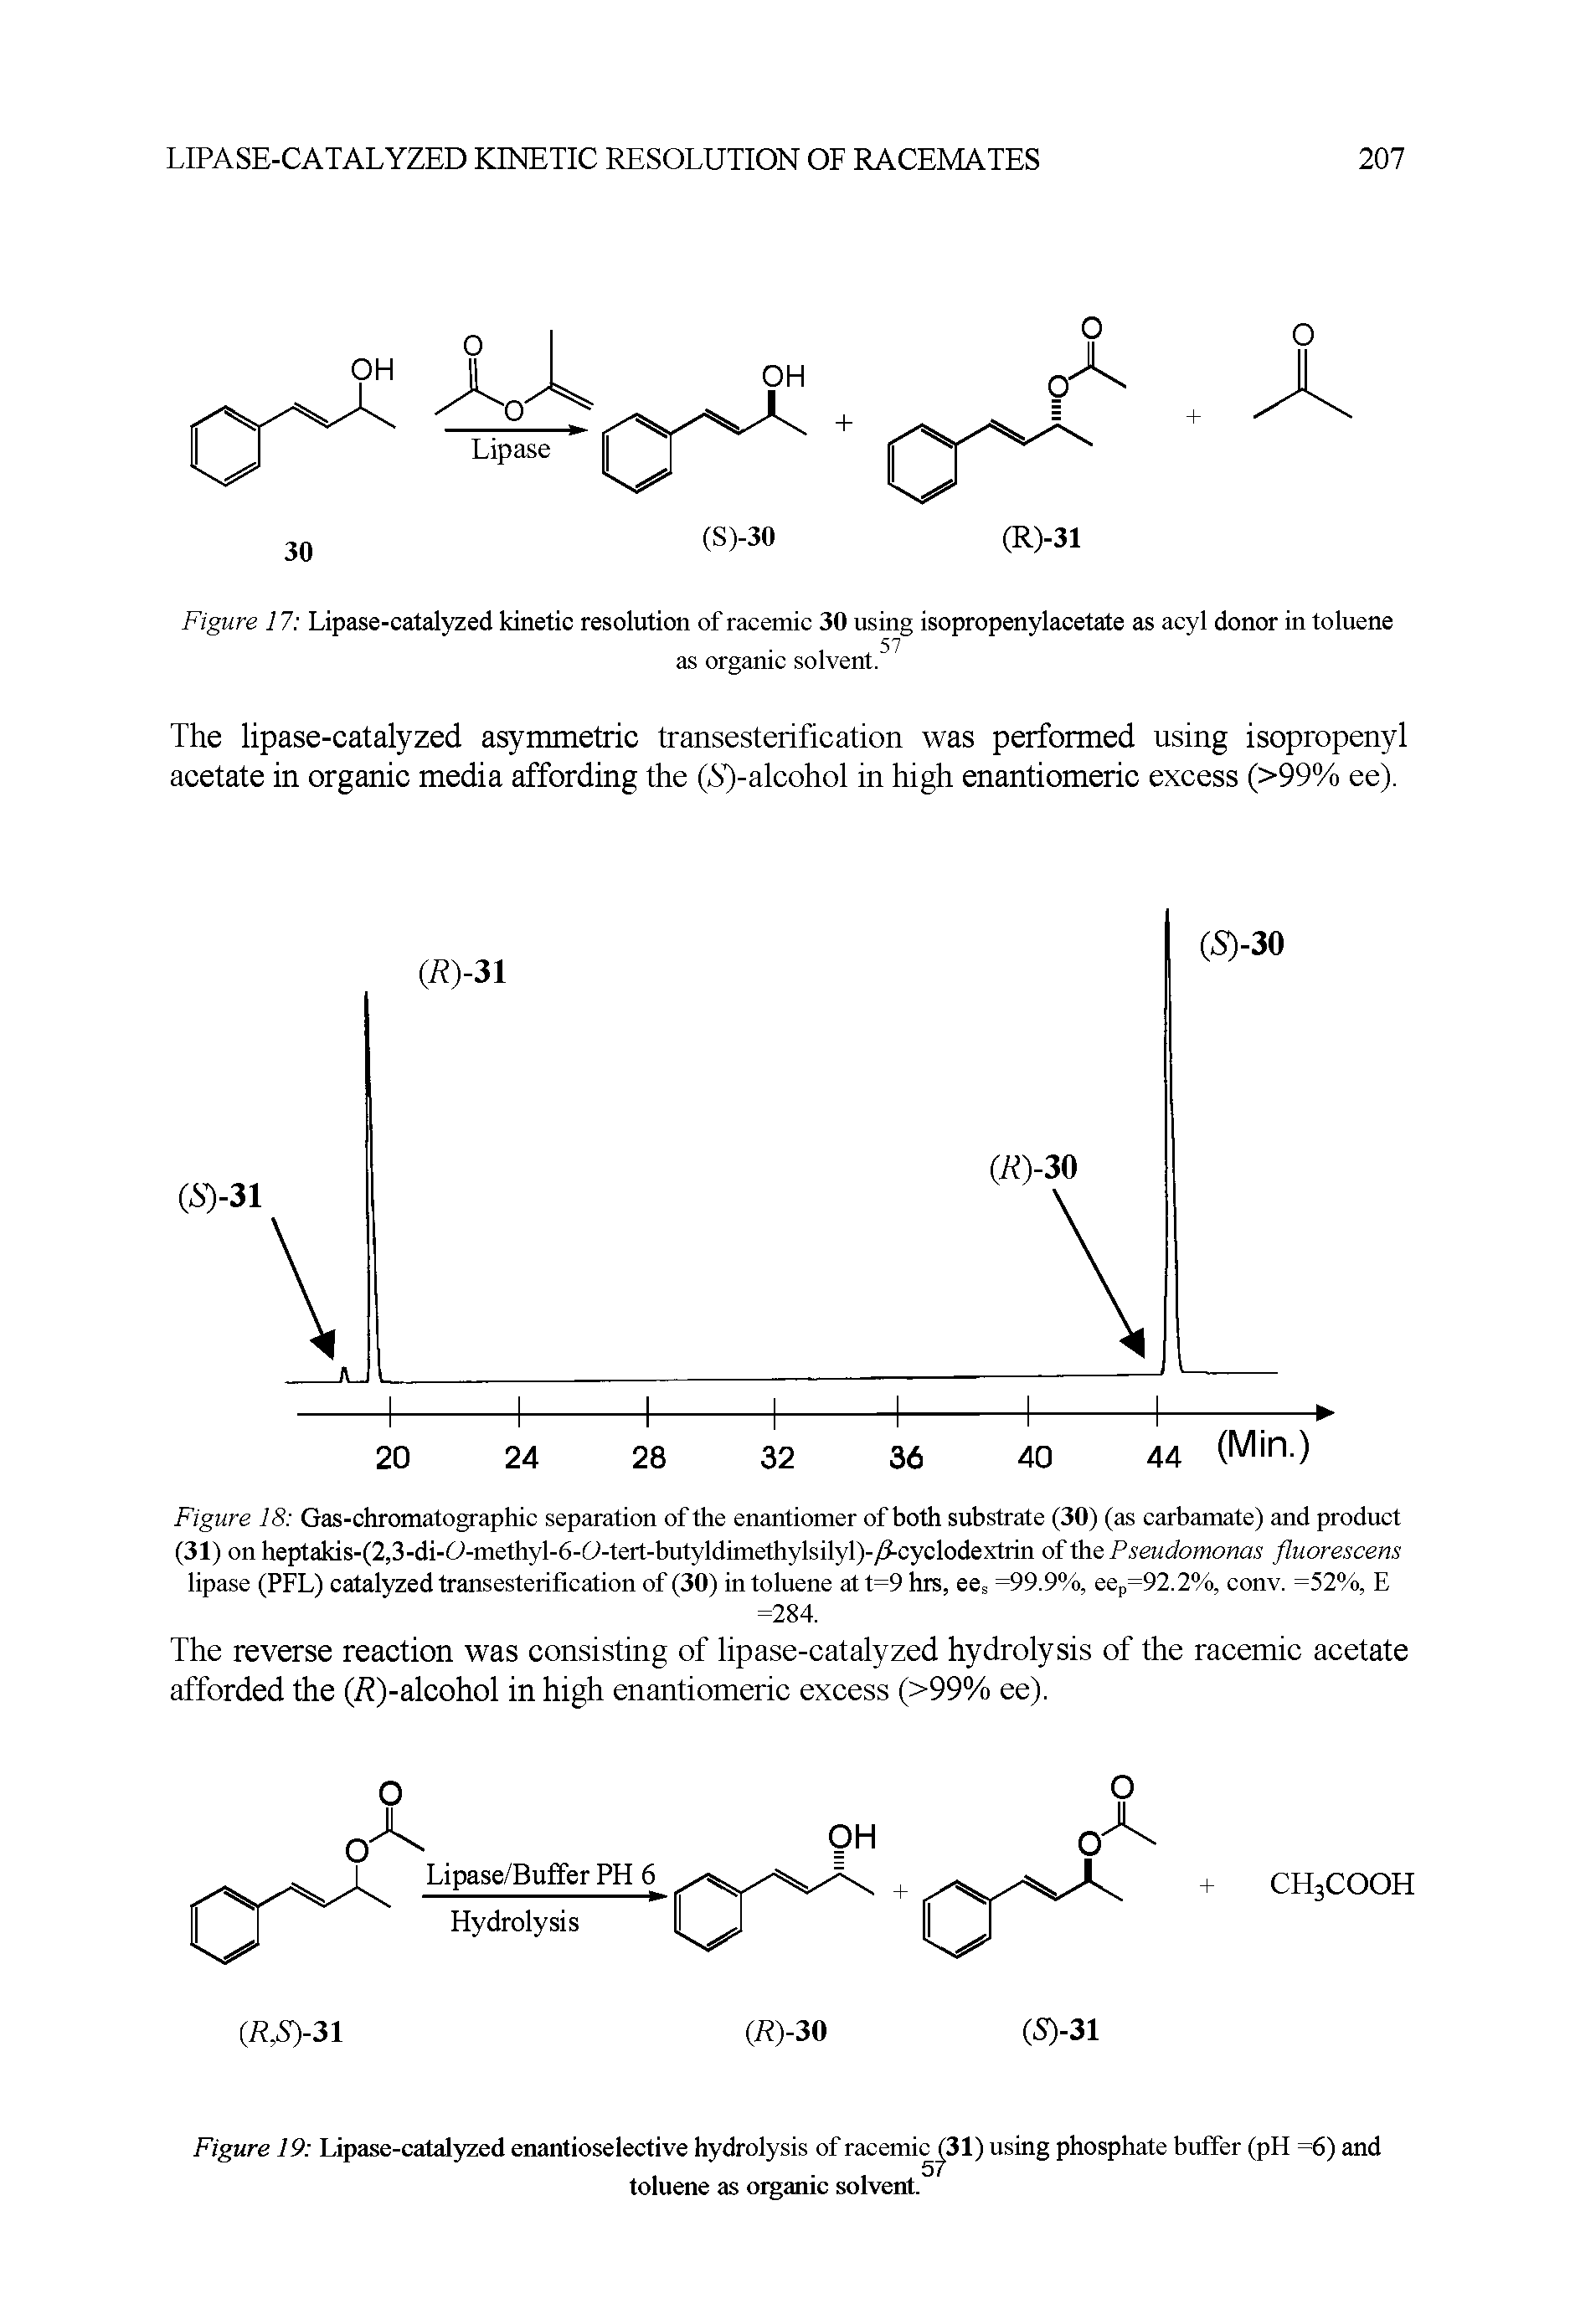 Figure 18 Gas-chromatographic separation of the enantiomer of both substrate (30) (as carbamate) and product (31) on heptakis-(2,3-di-6>-methyl-6-6>-tert-butyldimethylsilyl)-/J-cyclodextrin of the Pseudomonas fluorescens lipase (PFL) catalyzed transesterification of (30) in toluene att=9 hrs, ees =99.9%, eep=92.2%, conv. =52%, E...